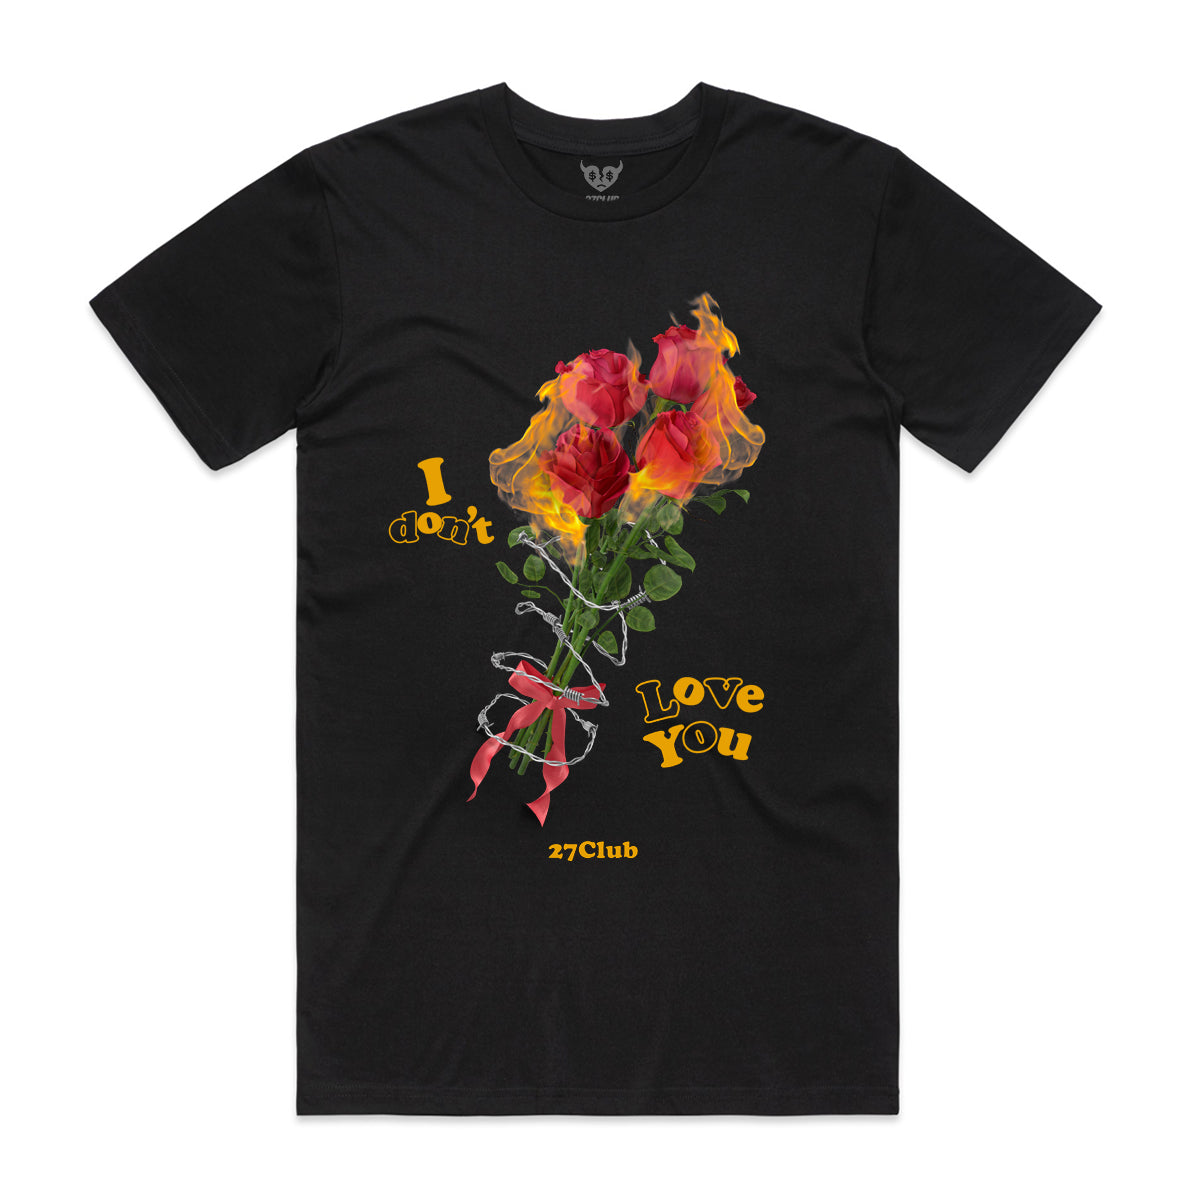 IDLY ROSES - Tee